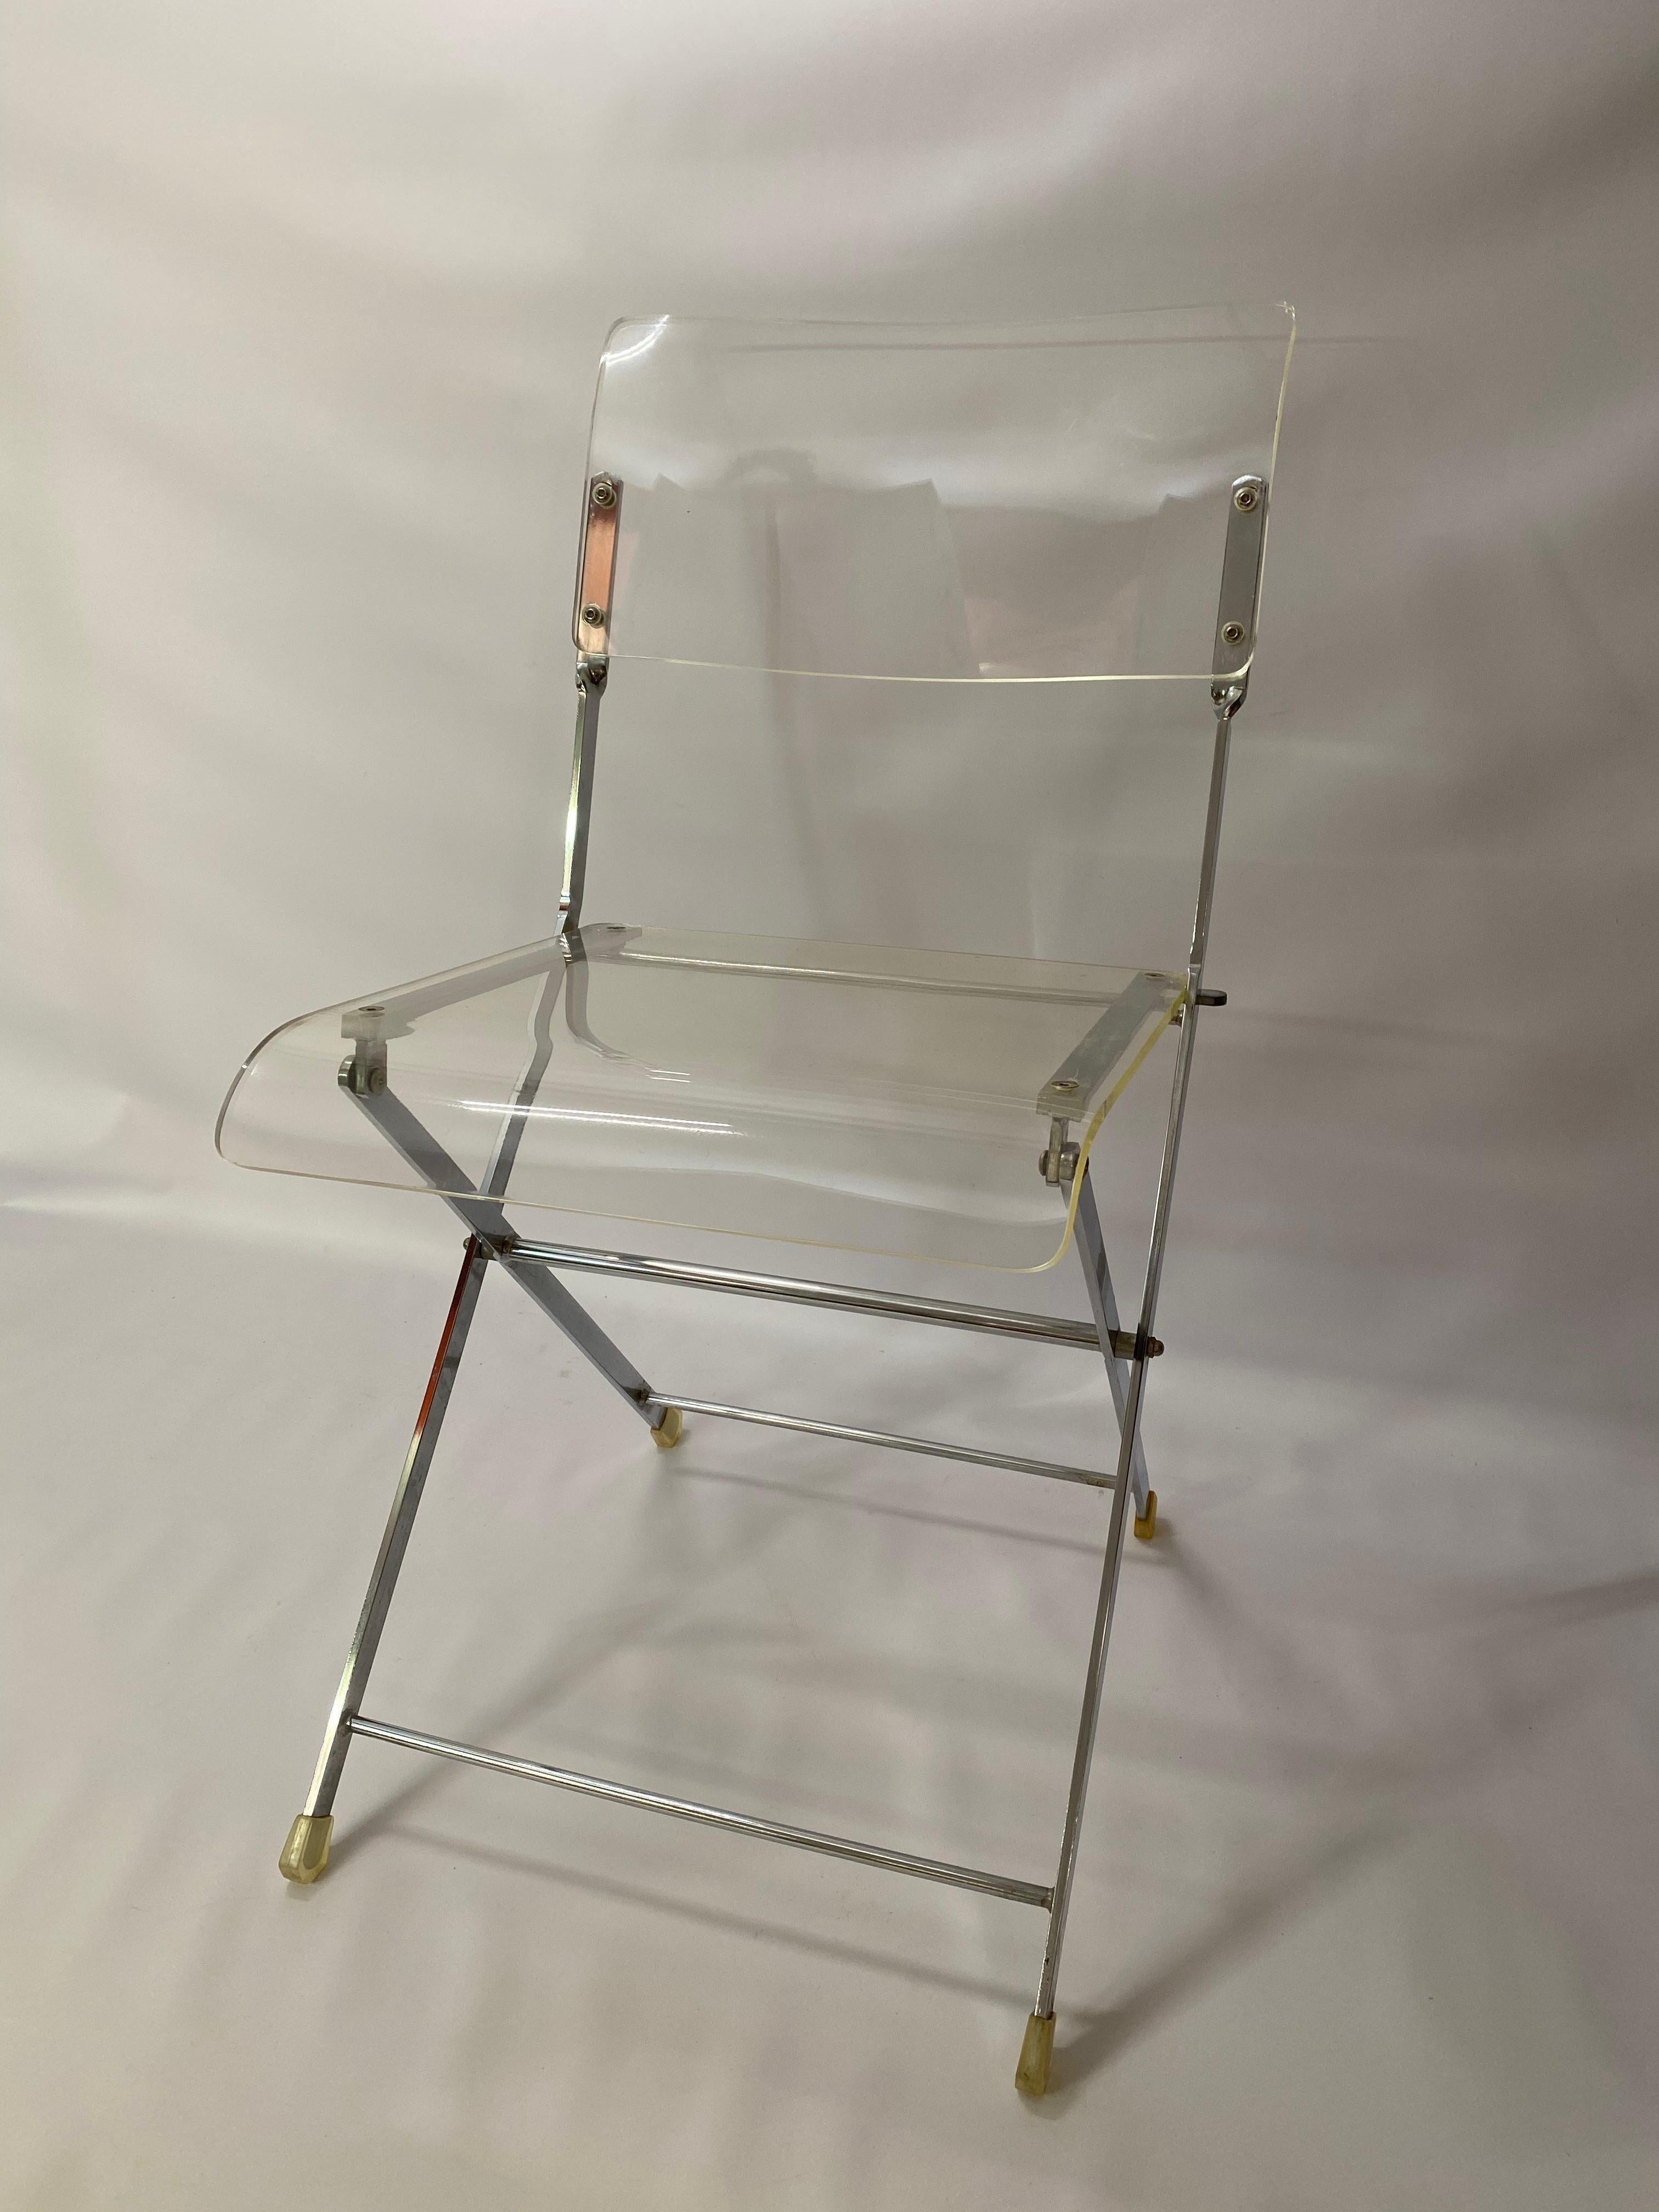 Folding Lucite and chrome chair. The Lucite is amazingly clear. Folds up flat for mobility and convenience. Comfortable enough as a desk, dining, accent chair chair. Circa 1970. Good condition with a few minor scratches and a small nick to the edge.